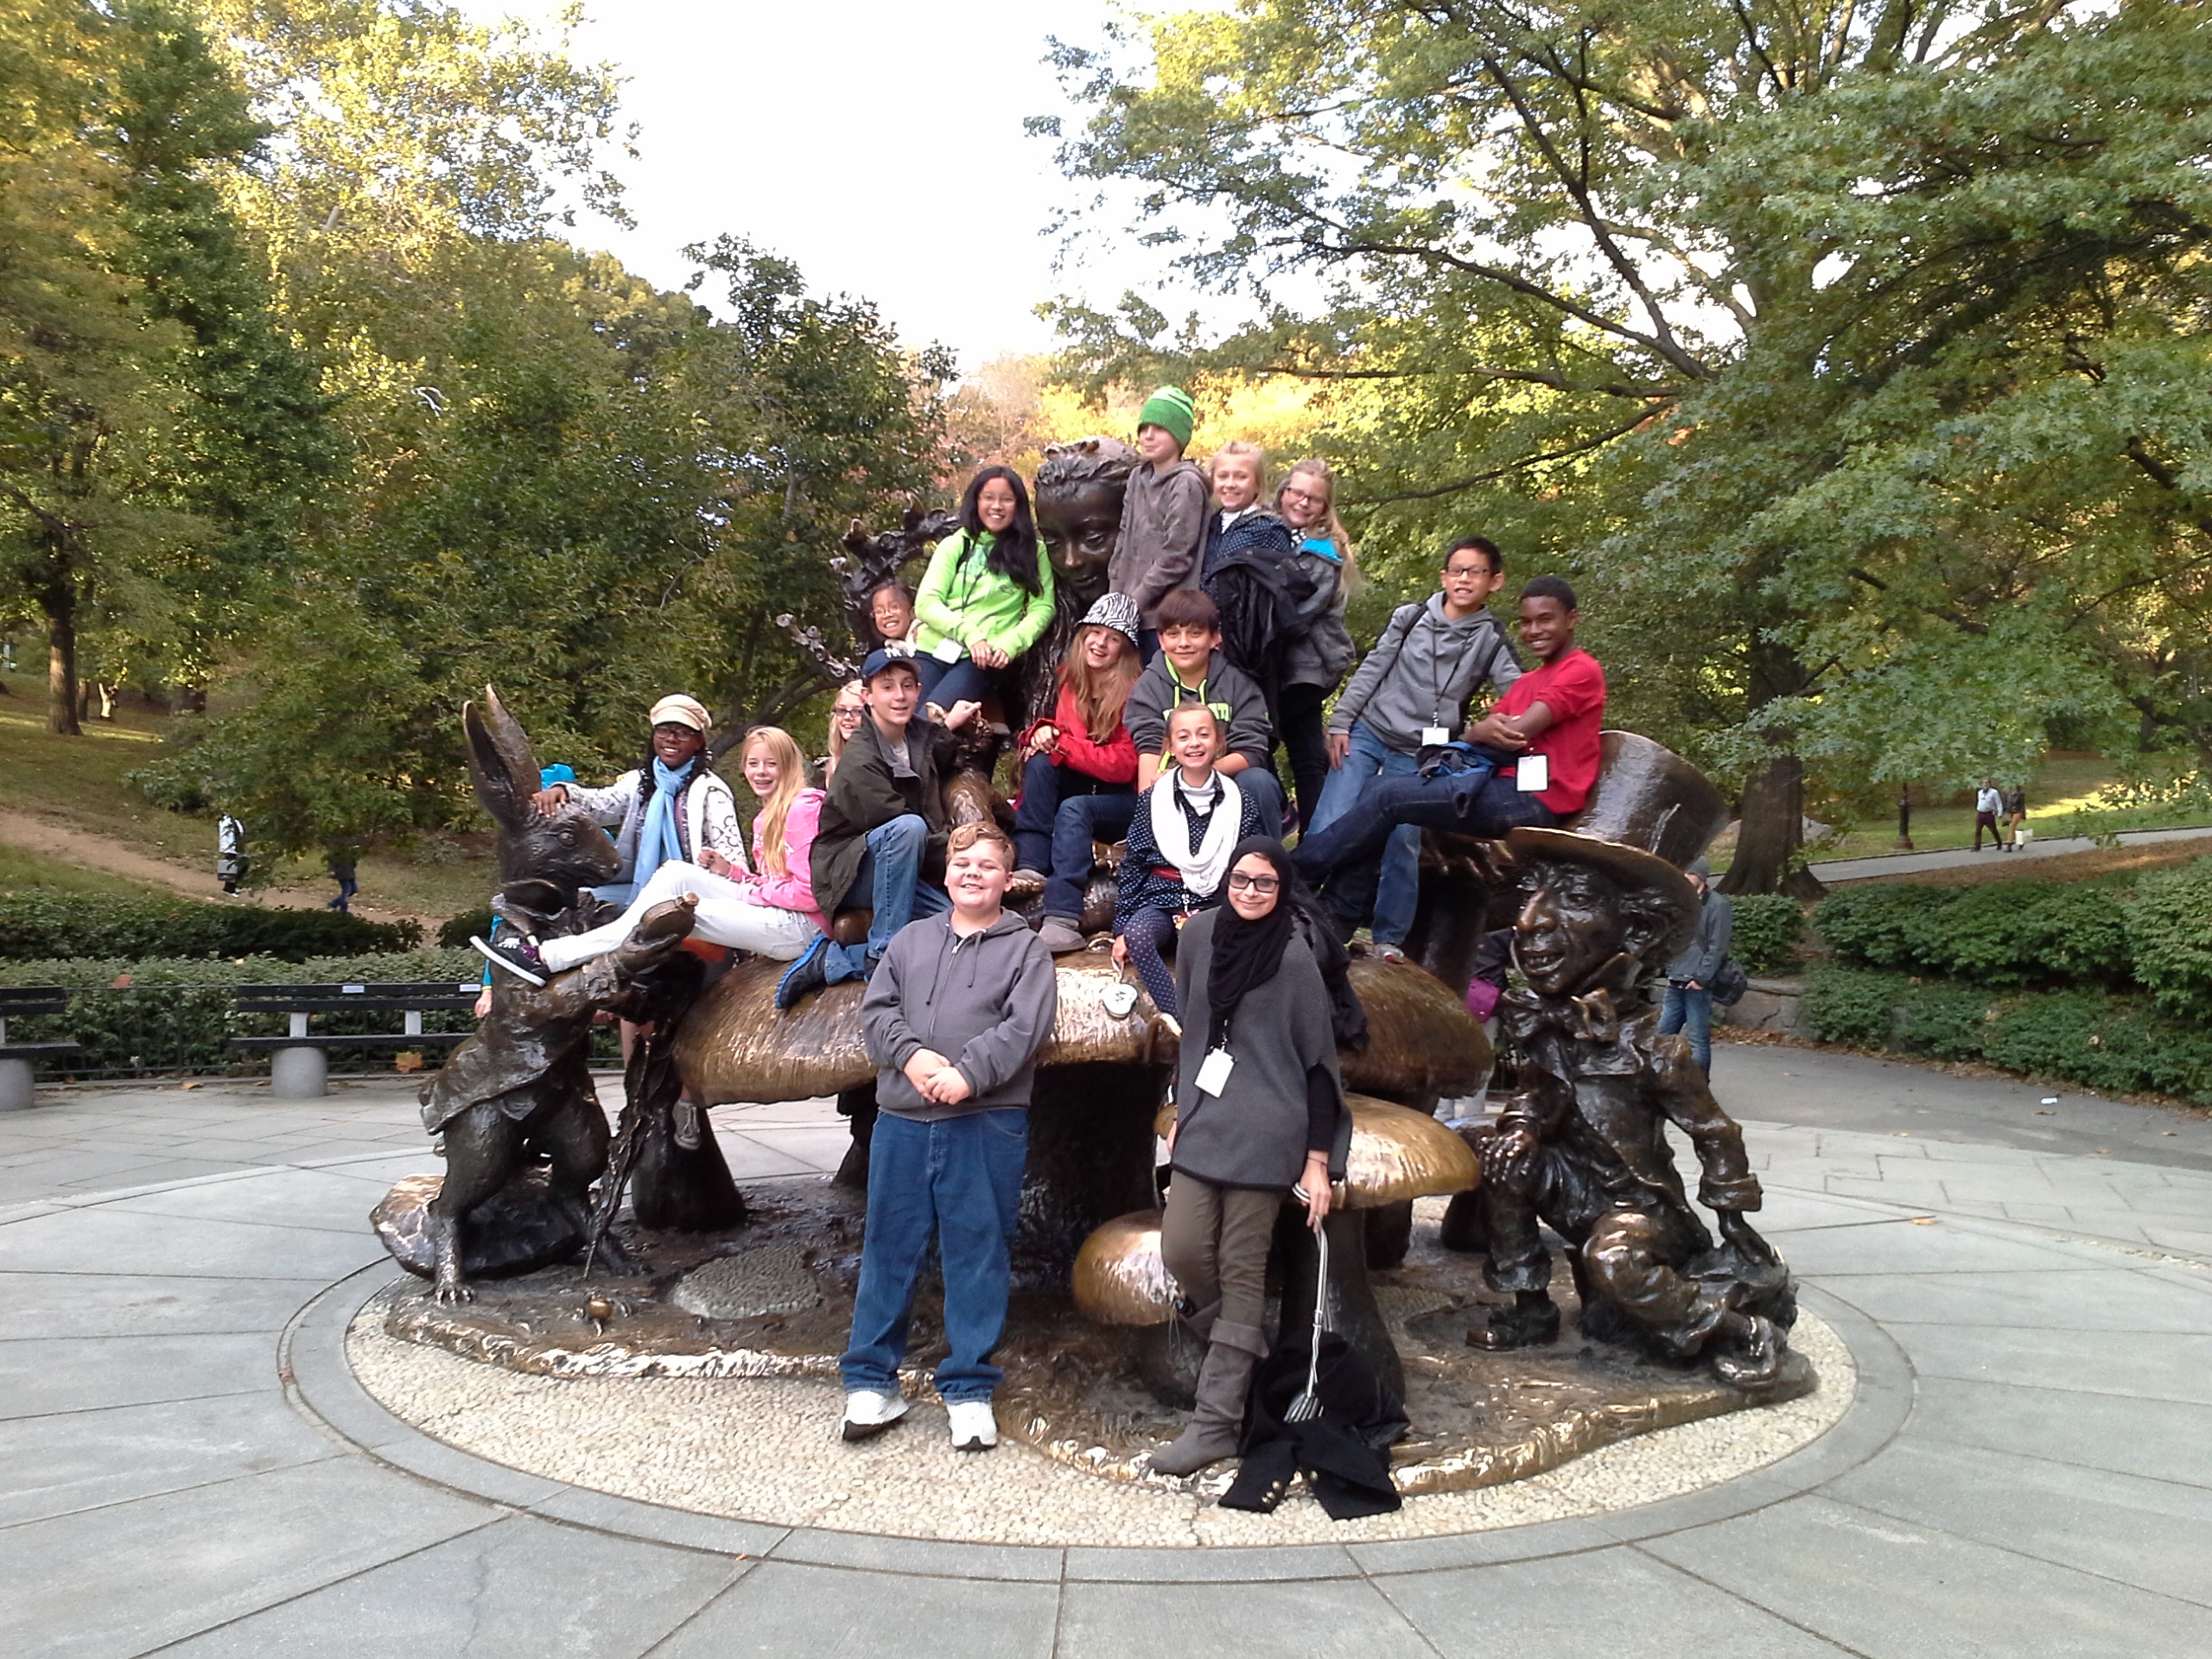 Group of middle school students posing on Alice in Wonderland statue in Central Park, New York City